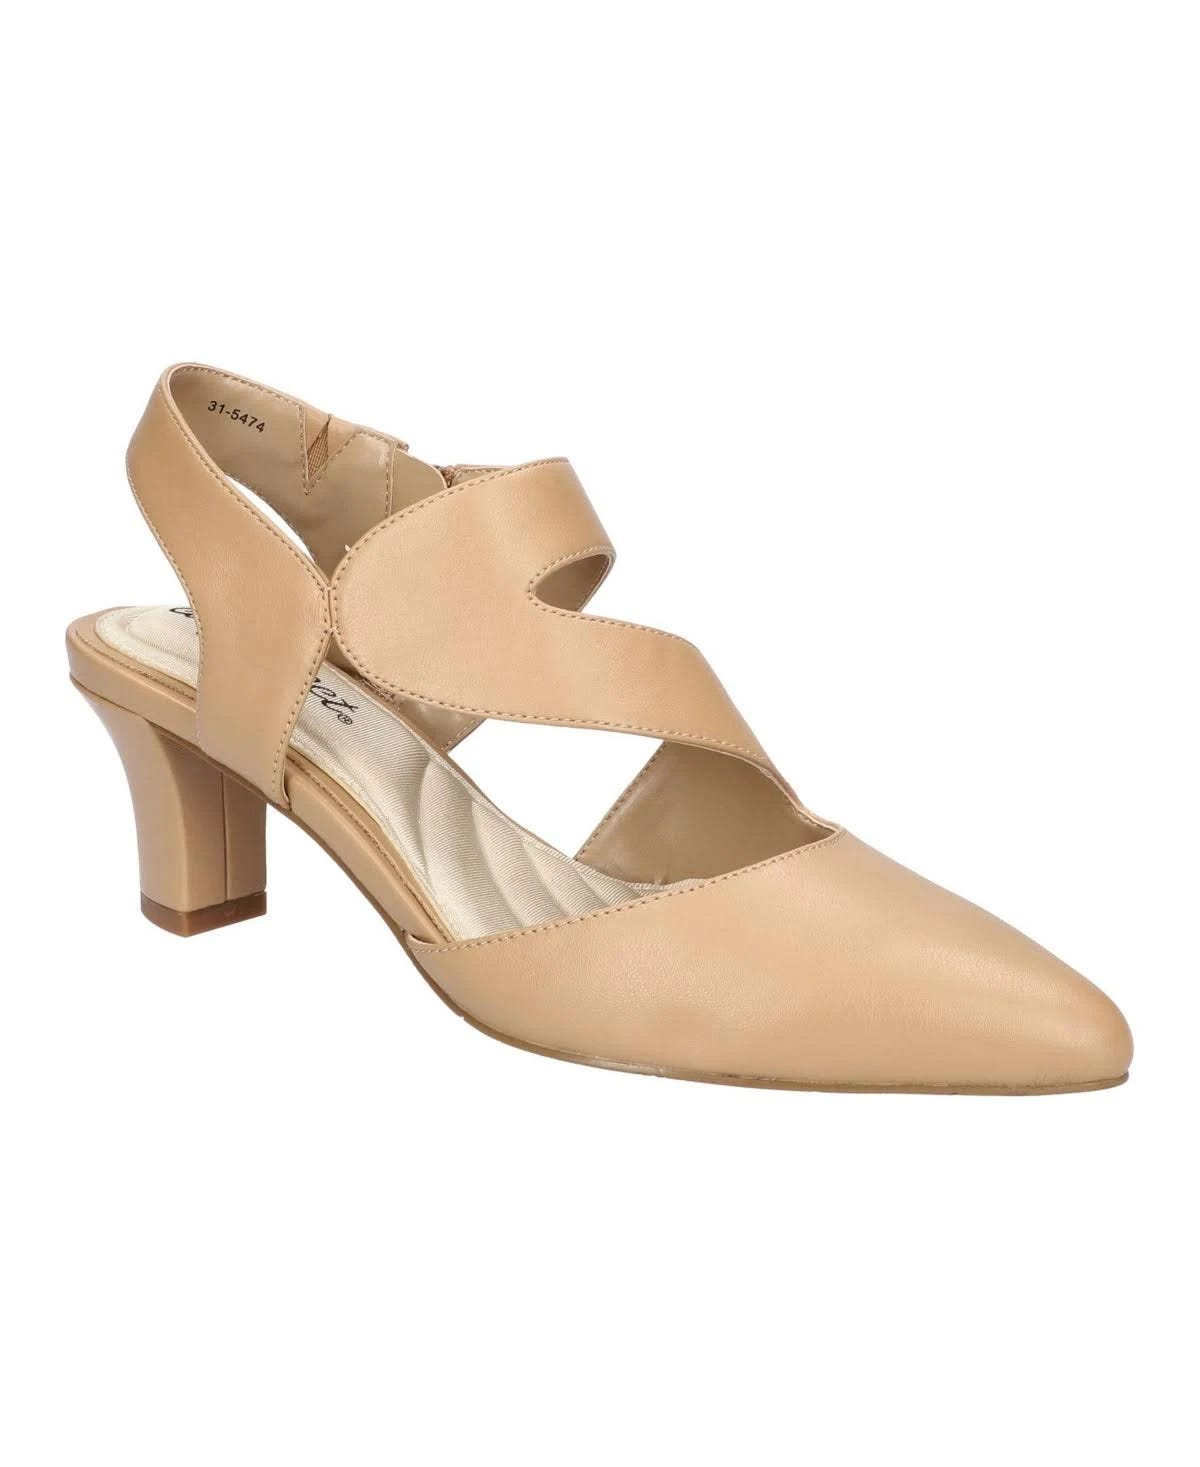 Comfortable Nude Heels for Wide Fit: Vegan Leather Venue Pump by Easy Street | Image